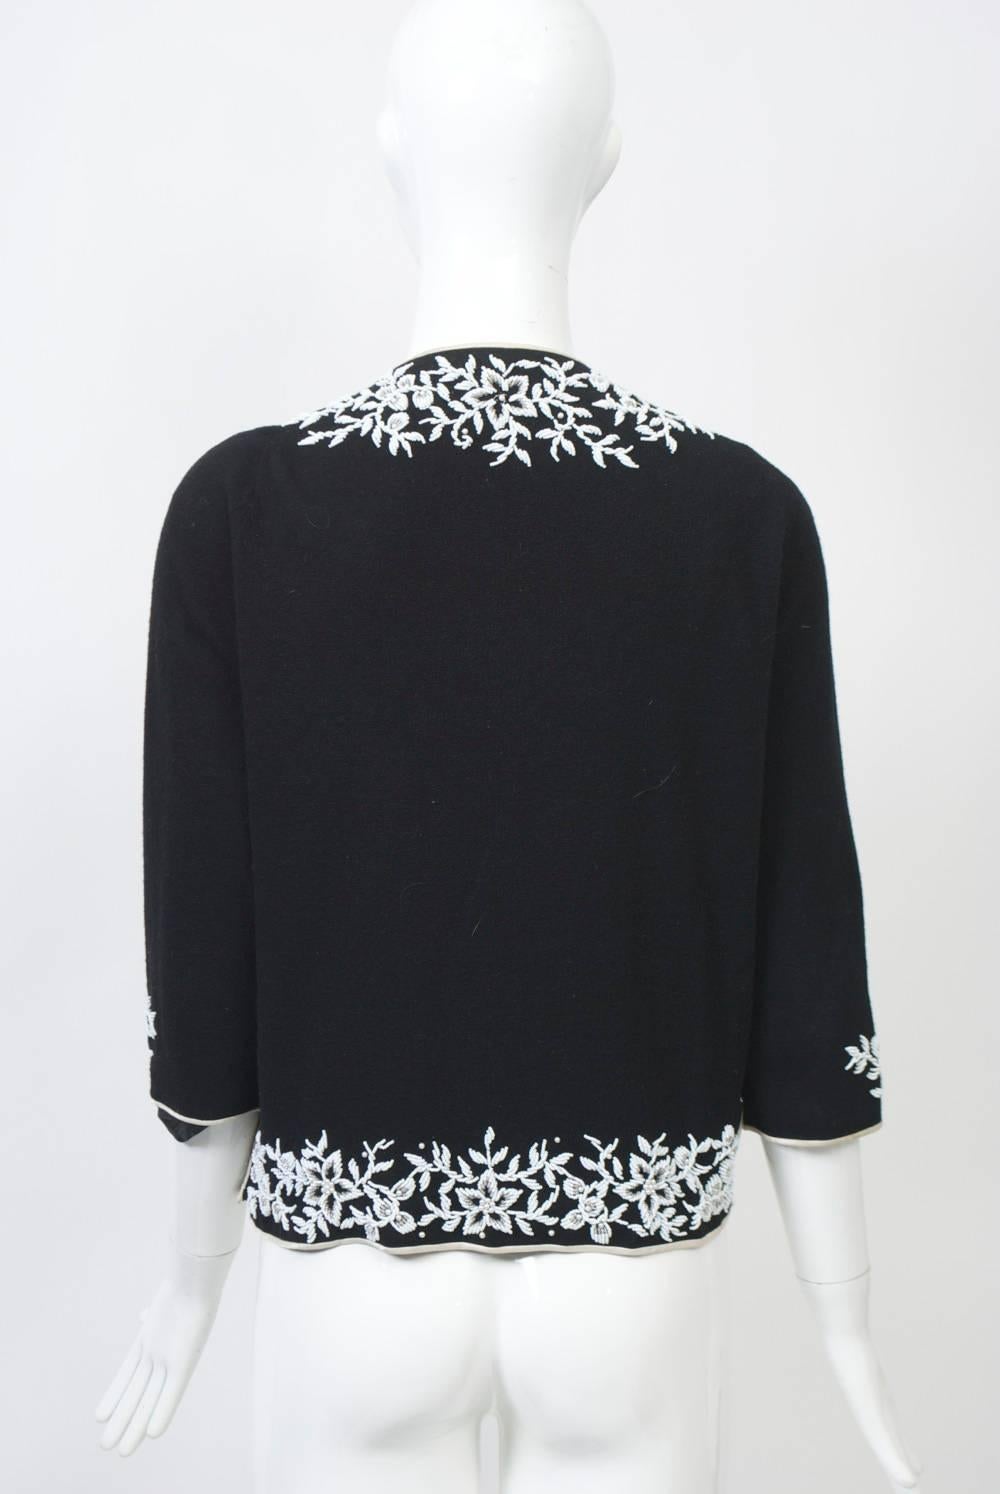 Black wool knit cardigan with white foliate beading around borders and decorating the three-quarter length sleeves. Edges bound in white satin, as are side slits, which can be hooked closed. Lined.